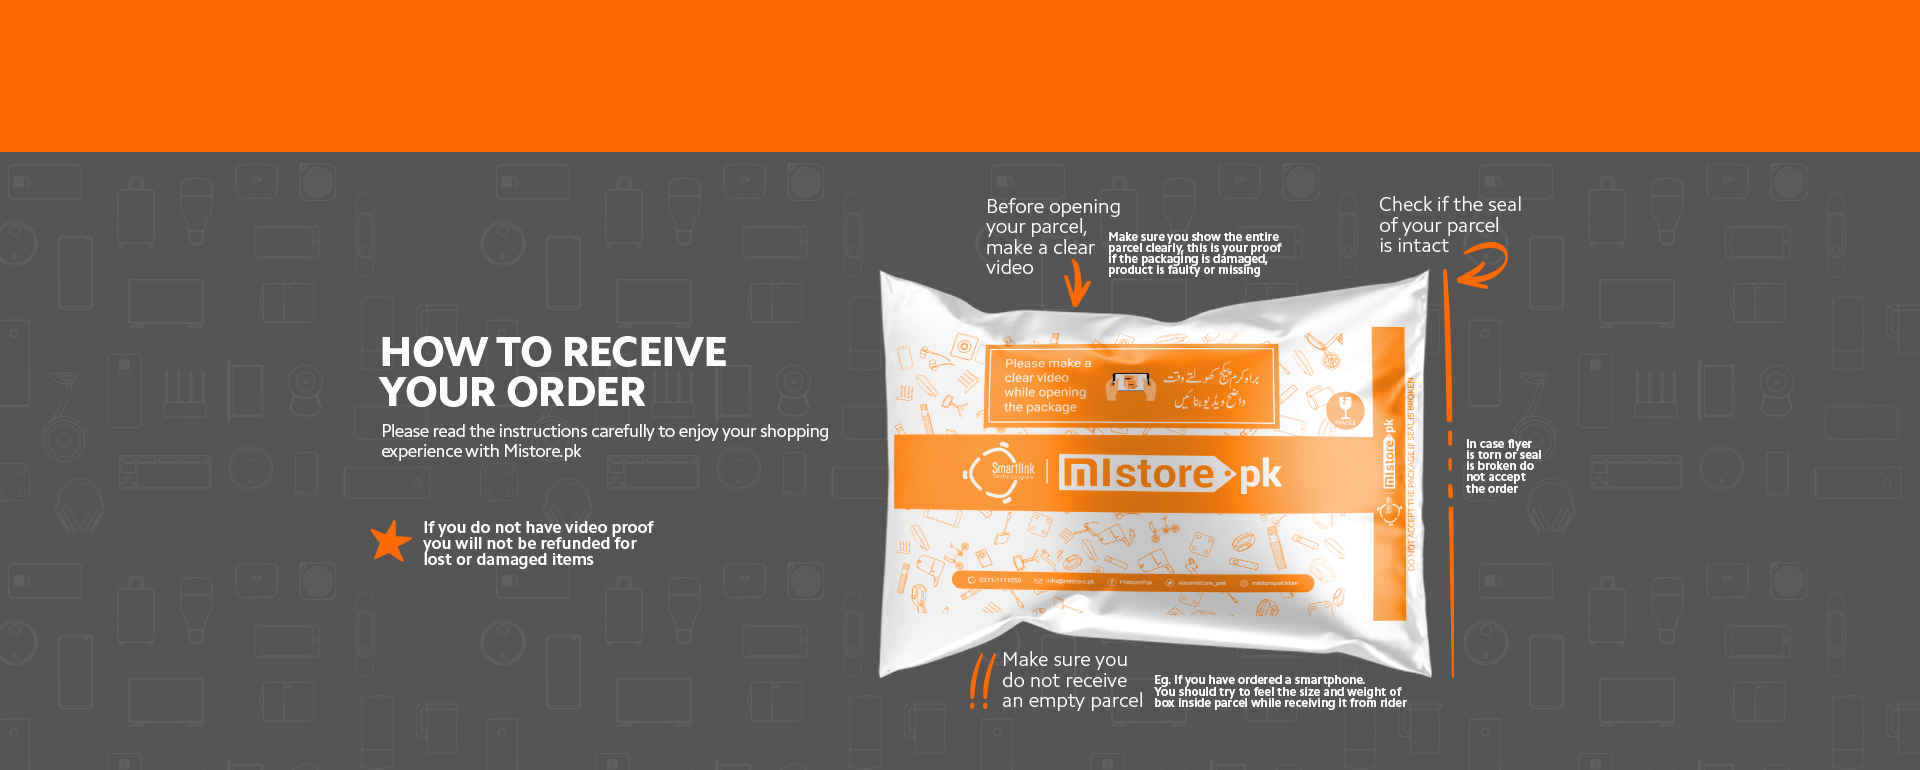 How to receive parcel